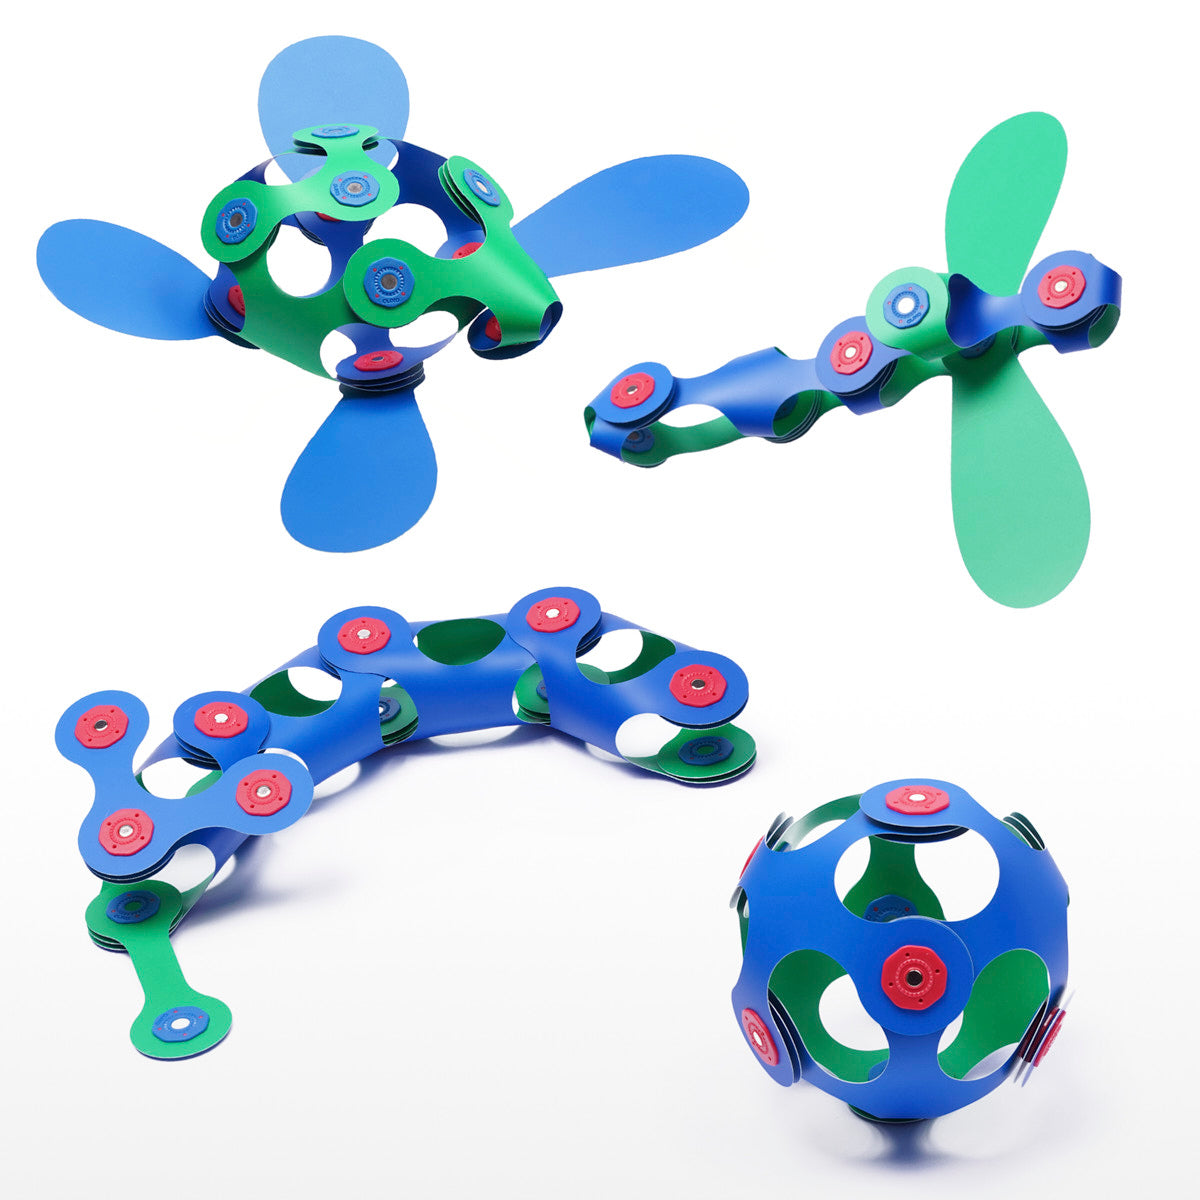 Clixo - Itsy Pack - Green/Blue - Magnetic Building